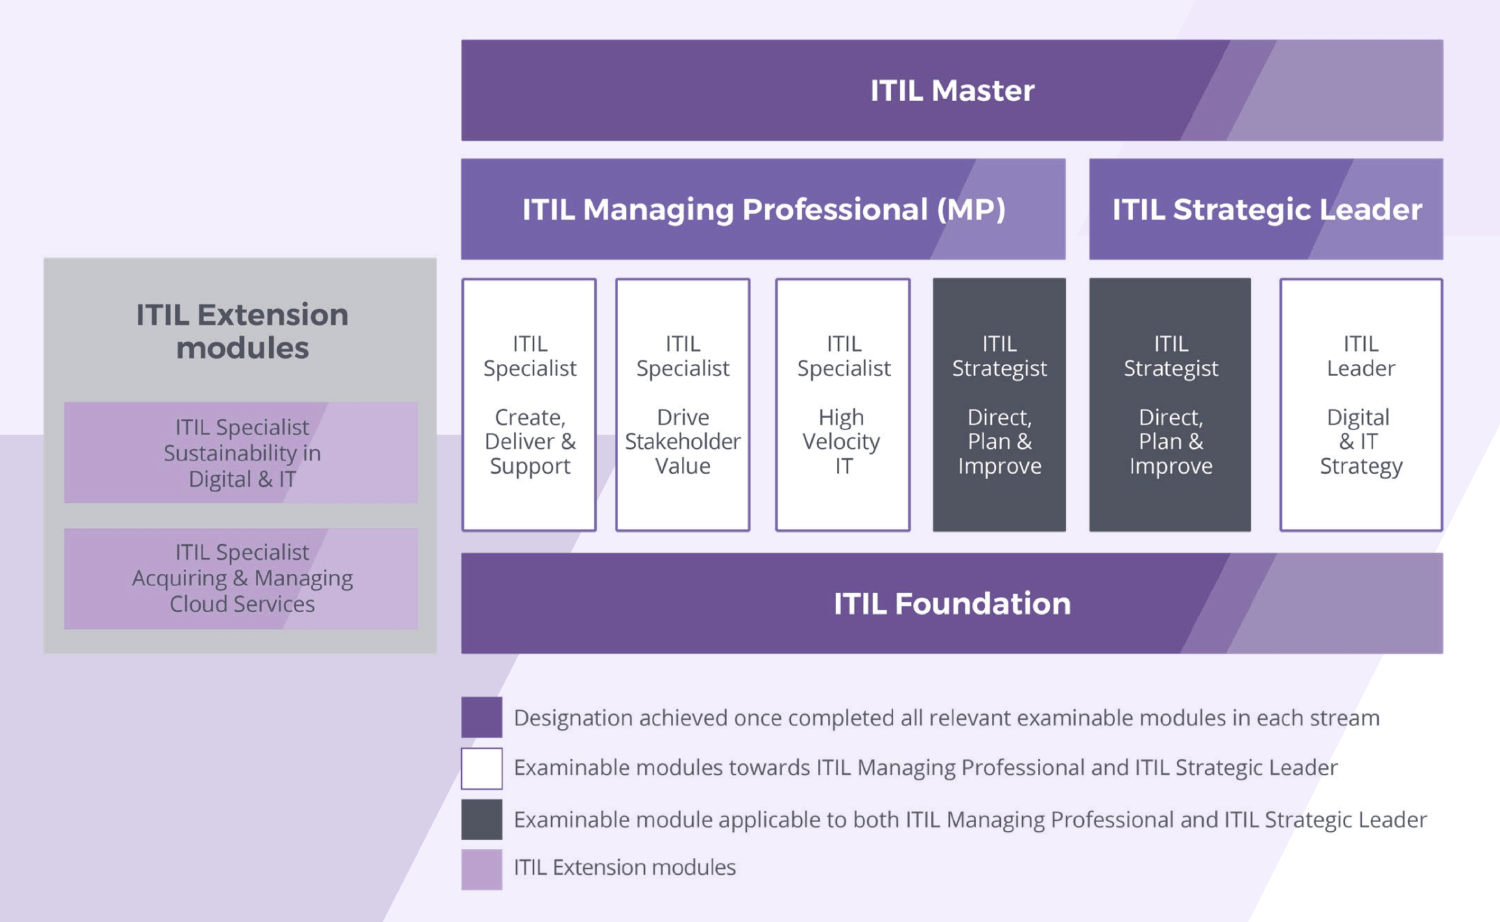 What Are The New ITIL® 4 Extension Modules?